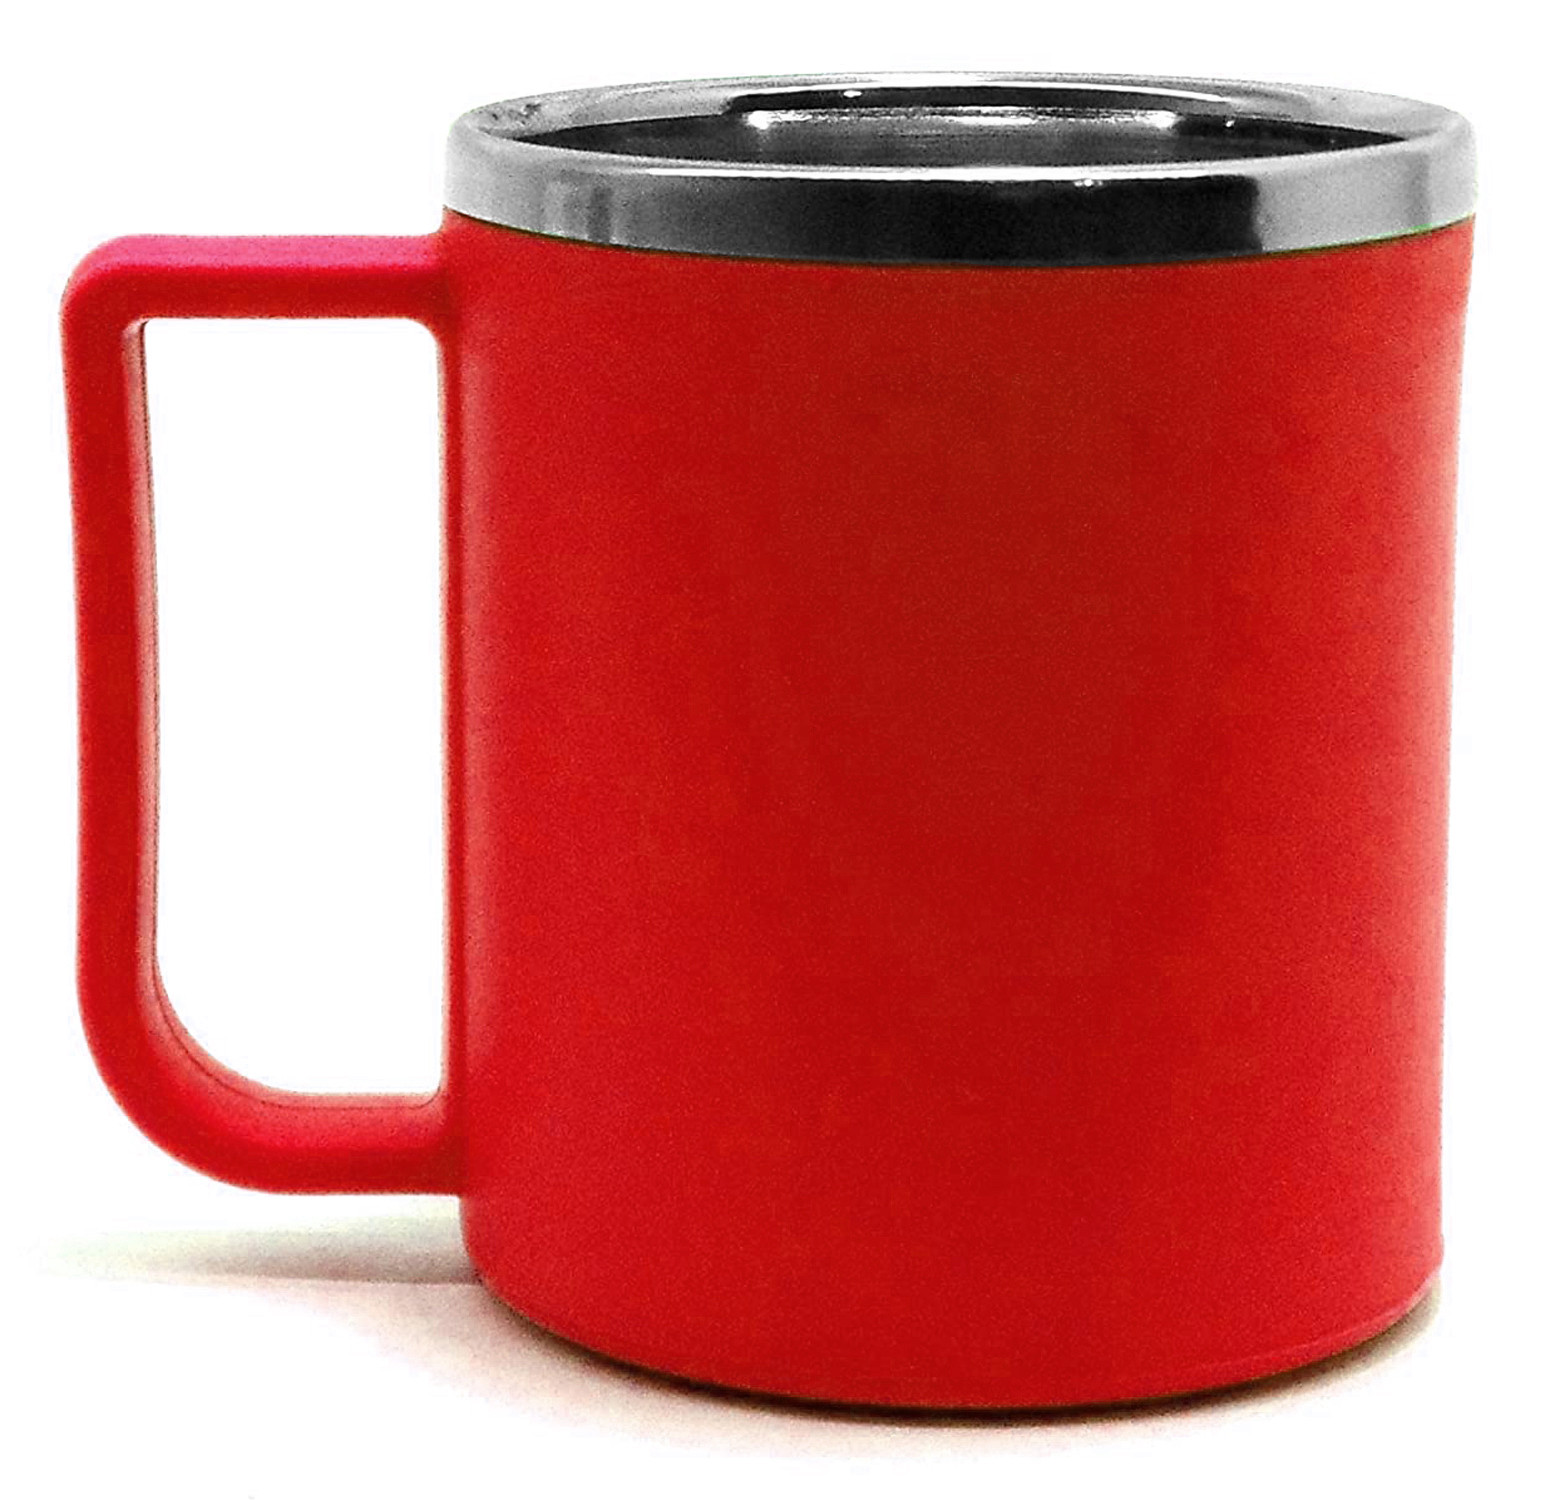 Kuber Industries Plastic Steel Cups for Coffee Tea Cocoa, Camping Mugs with Handle, Portable & Easy Clean,(Green & Red)